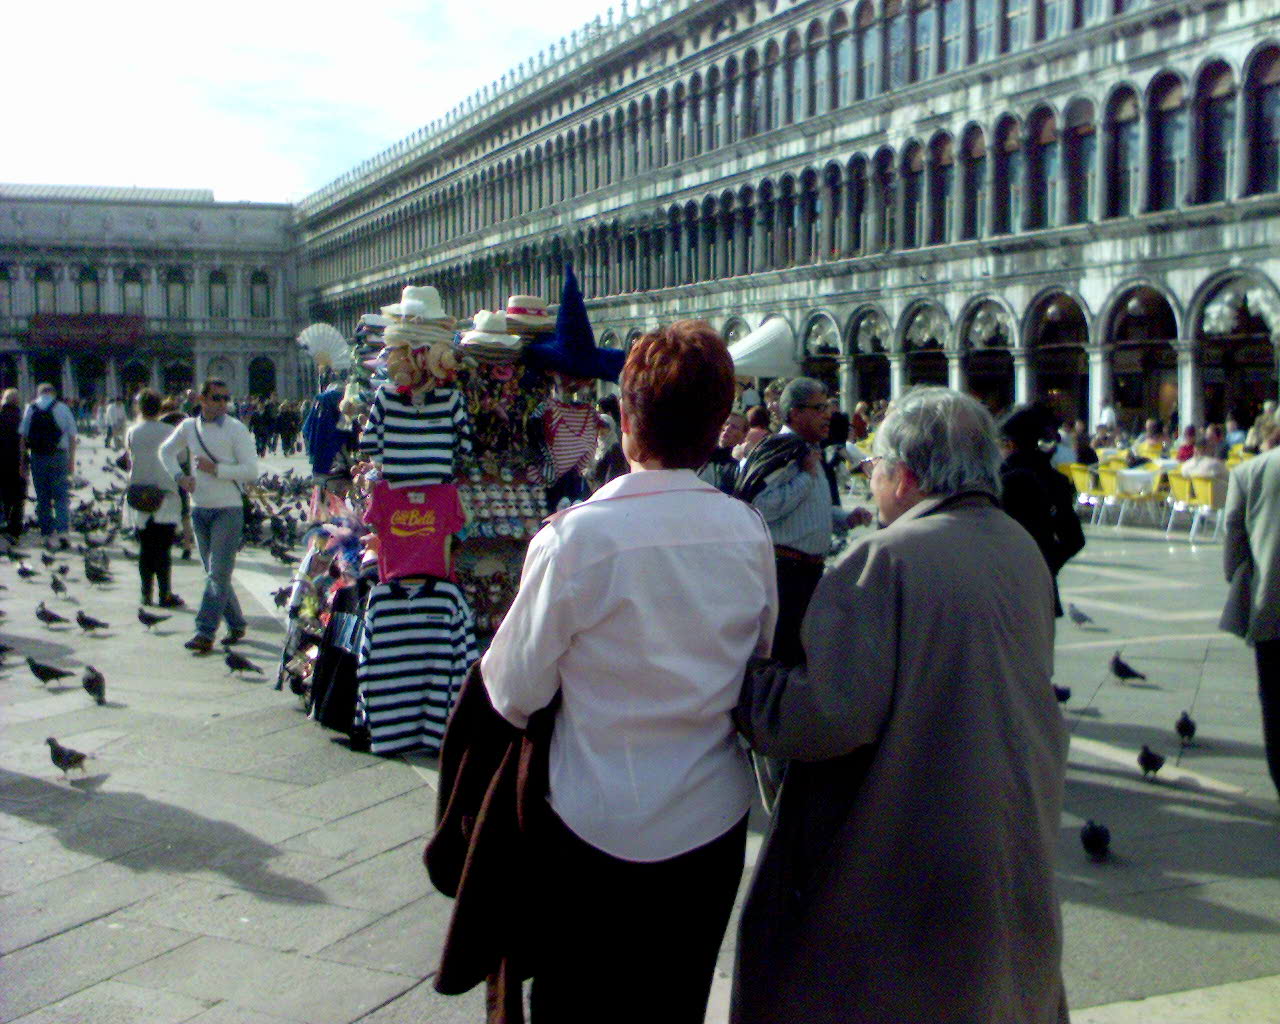 George Steiner 2007 in Venice due to classes on Compassion